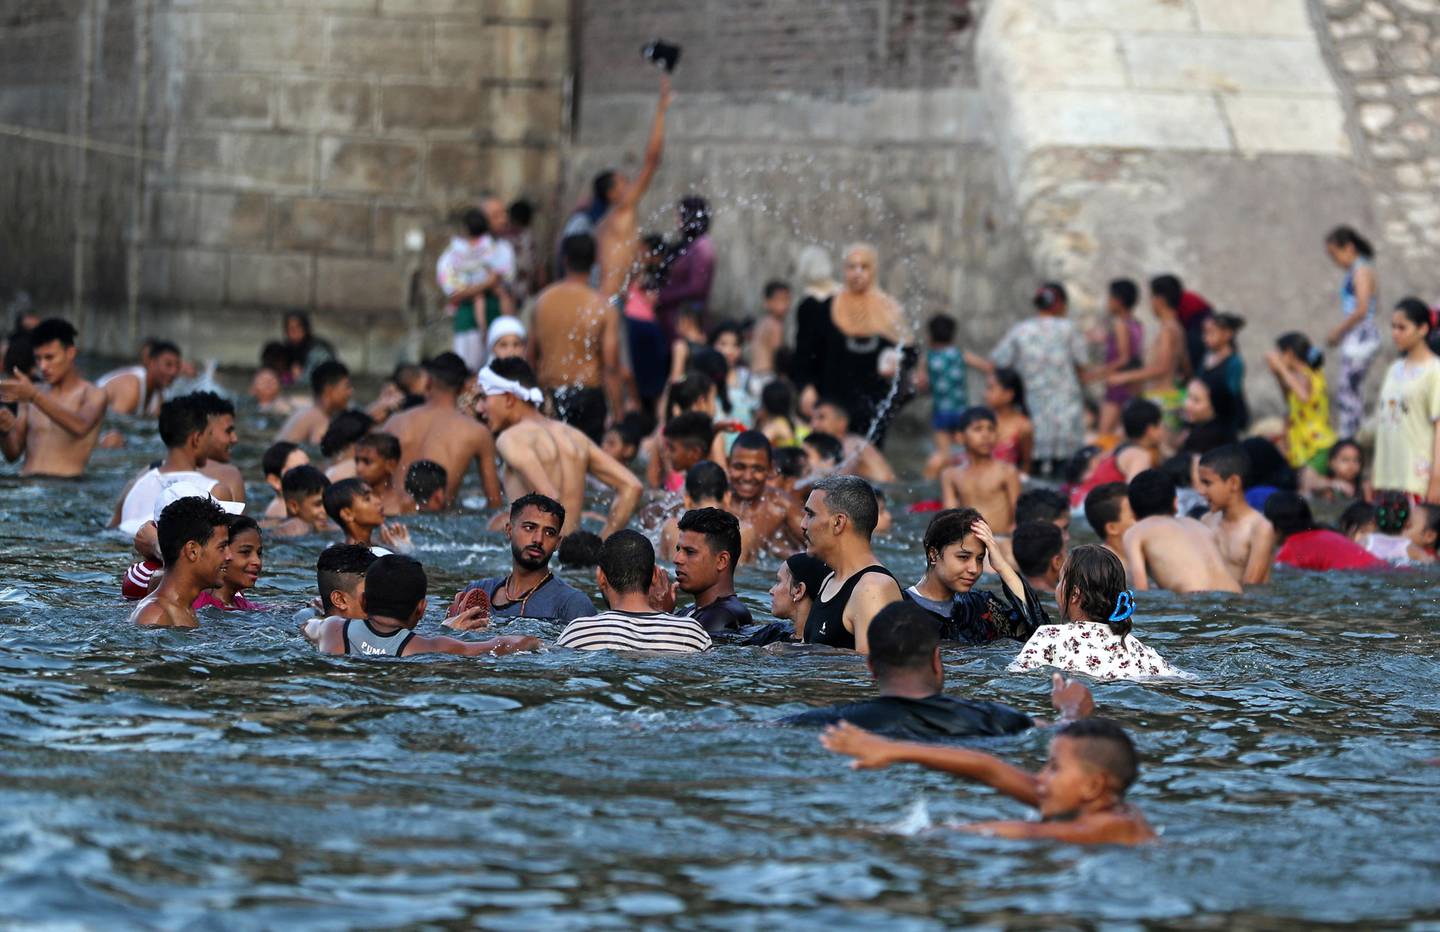 People swim in the Nile River during hot weather in Al-Qanater on the outskirts of Cairo in August. Reuters